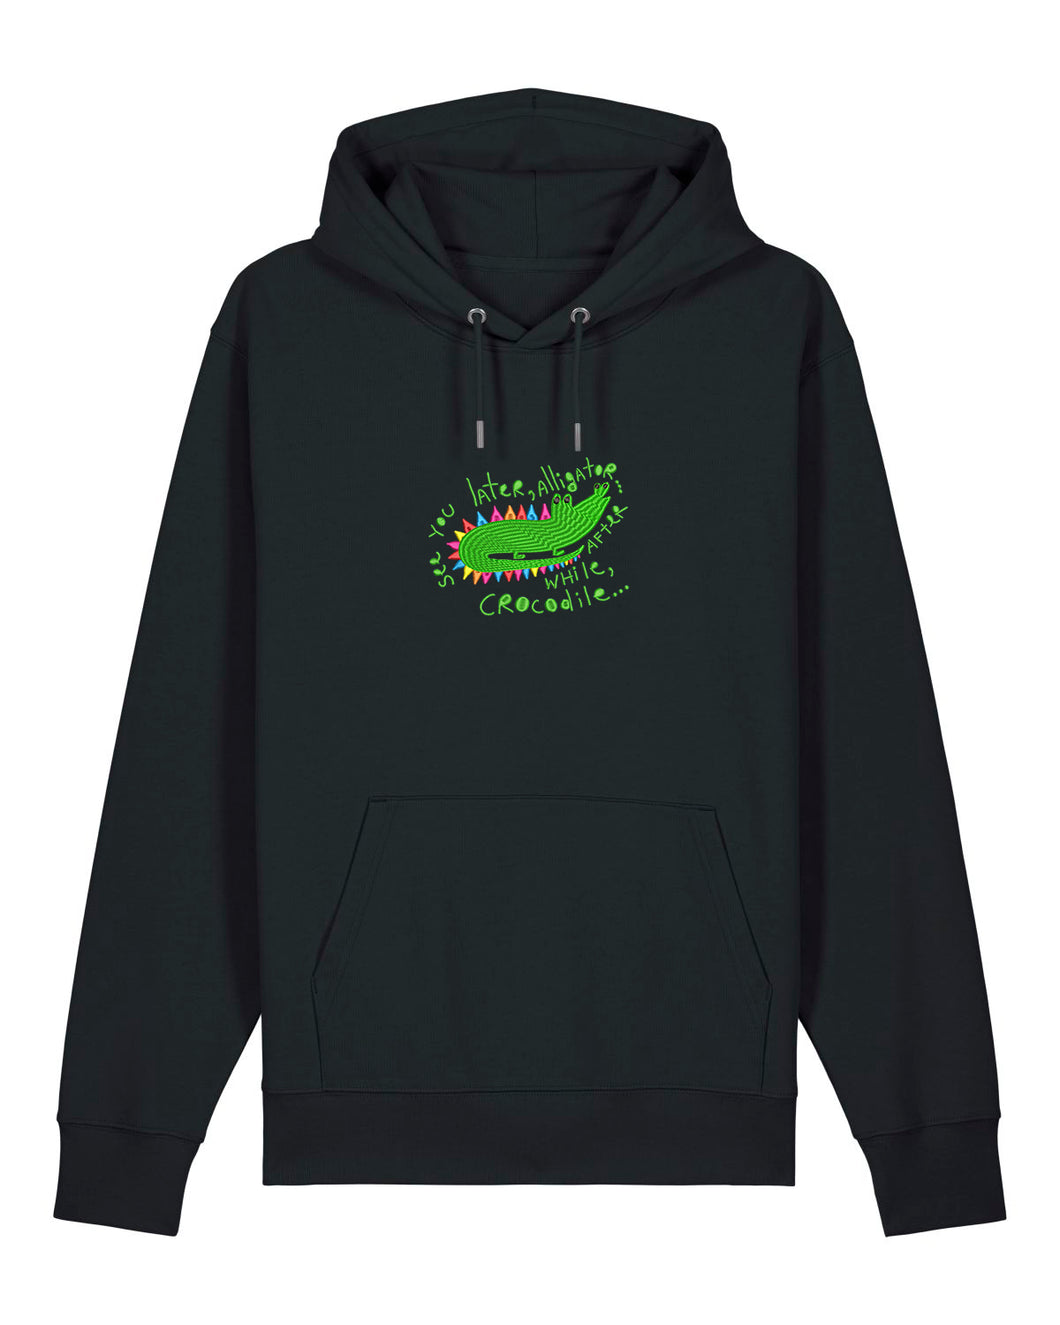 See you later aligator... 🐊 - Embroidered UNISEX hoodie